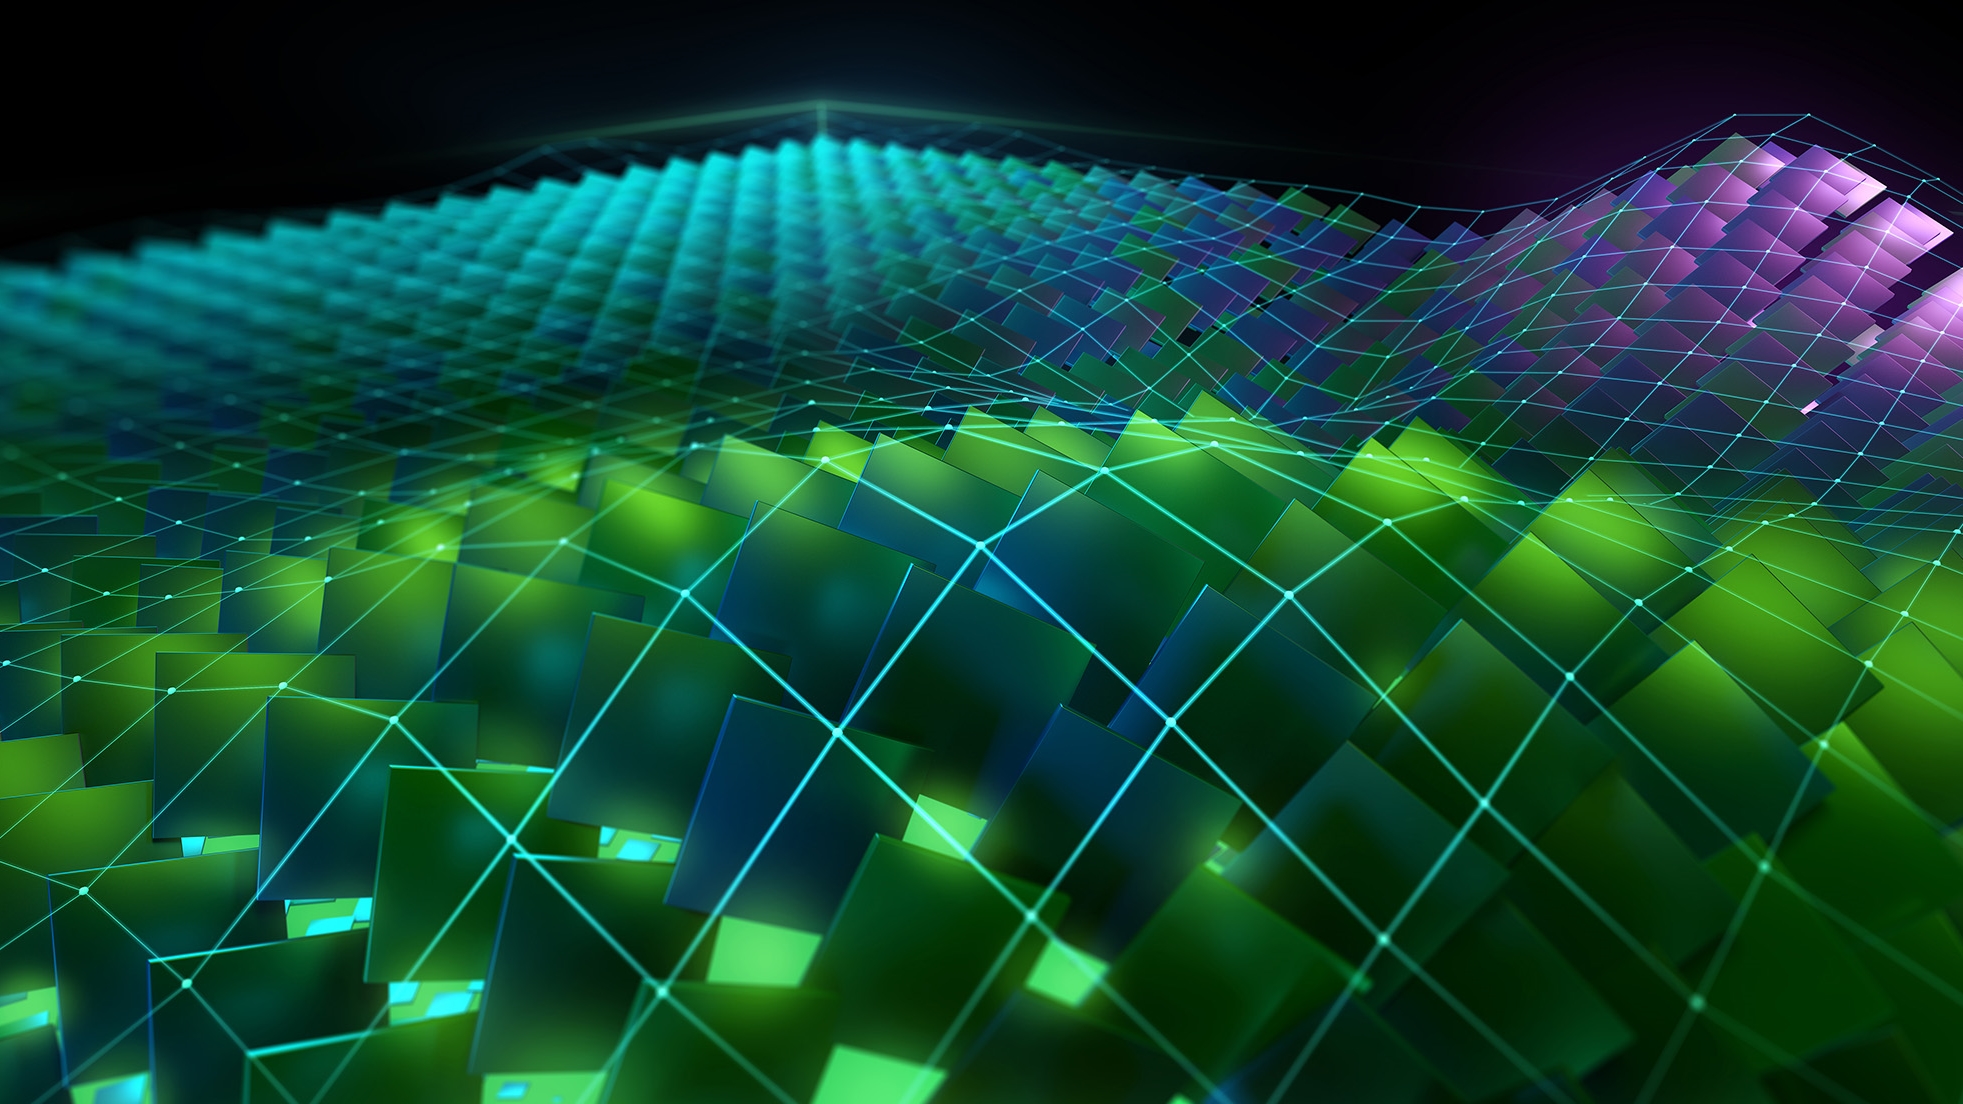 Decorative image of light fields in green, purple, and blue.